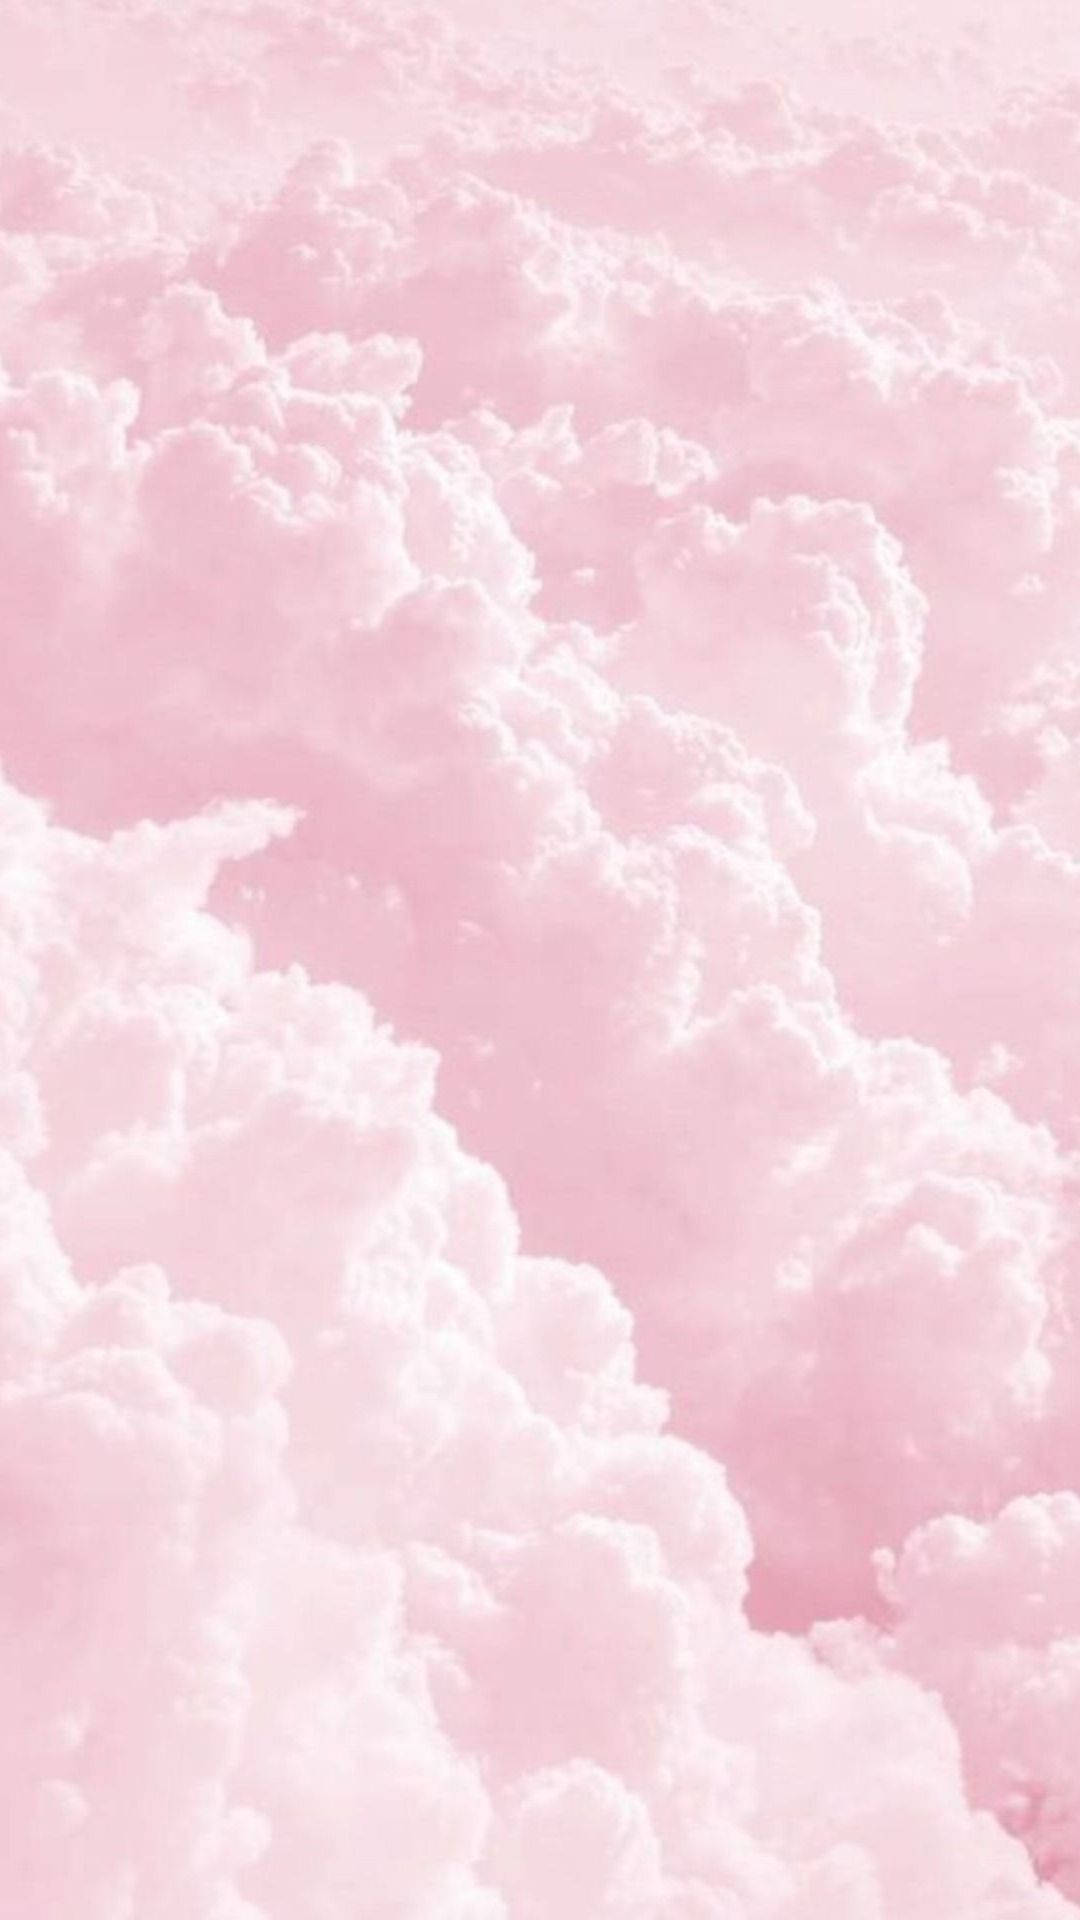 Calming Aesthetic Pink Sky Picture